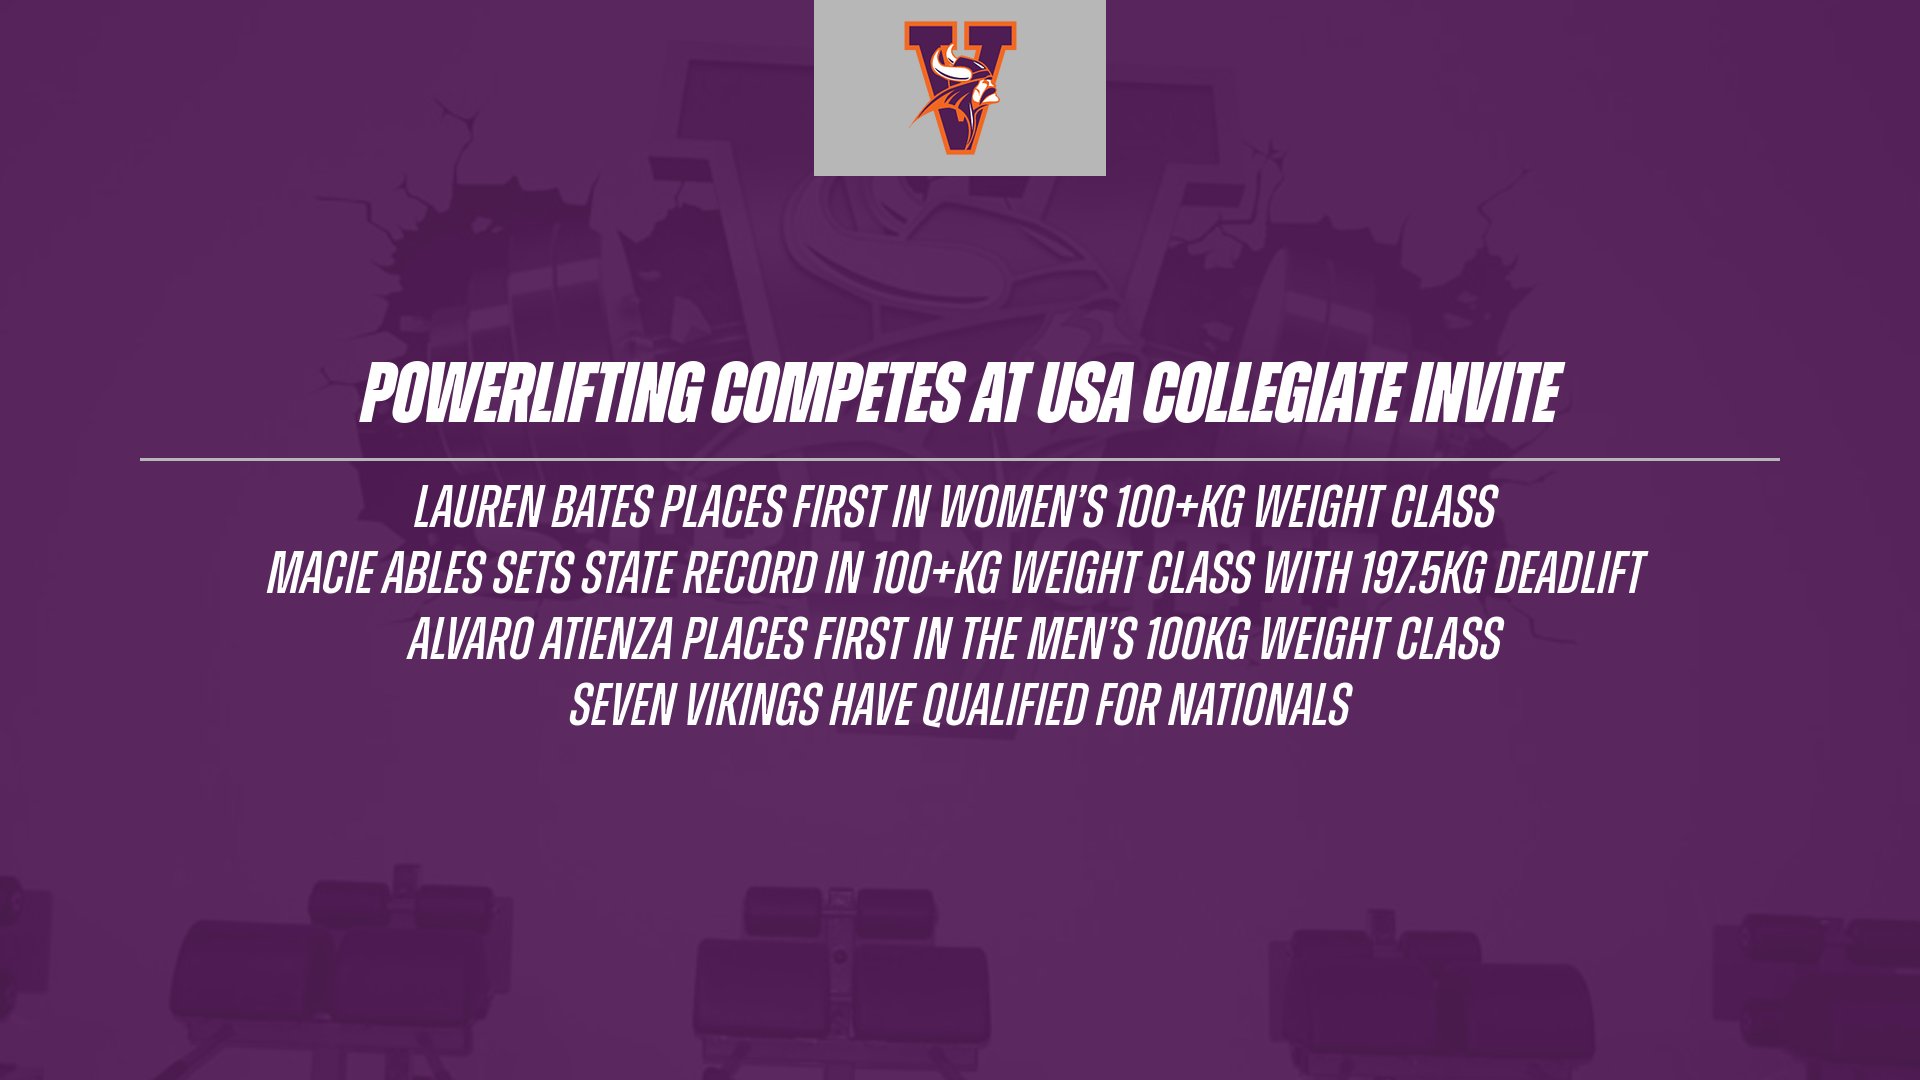 Powerlifting Teams Compete at USA Collegiate Invite